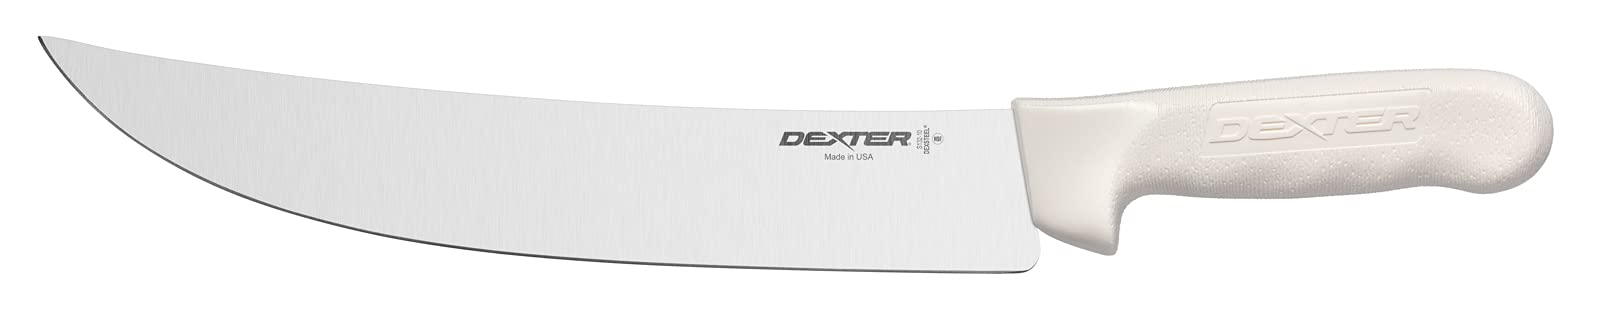 Dexter Outdoors Russell S132-10PCP 10" Cimeter - Sani-Safe Series,Silver